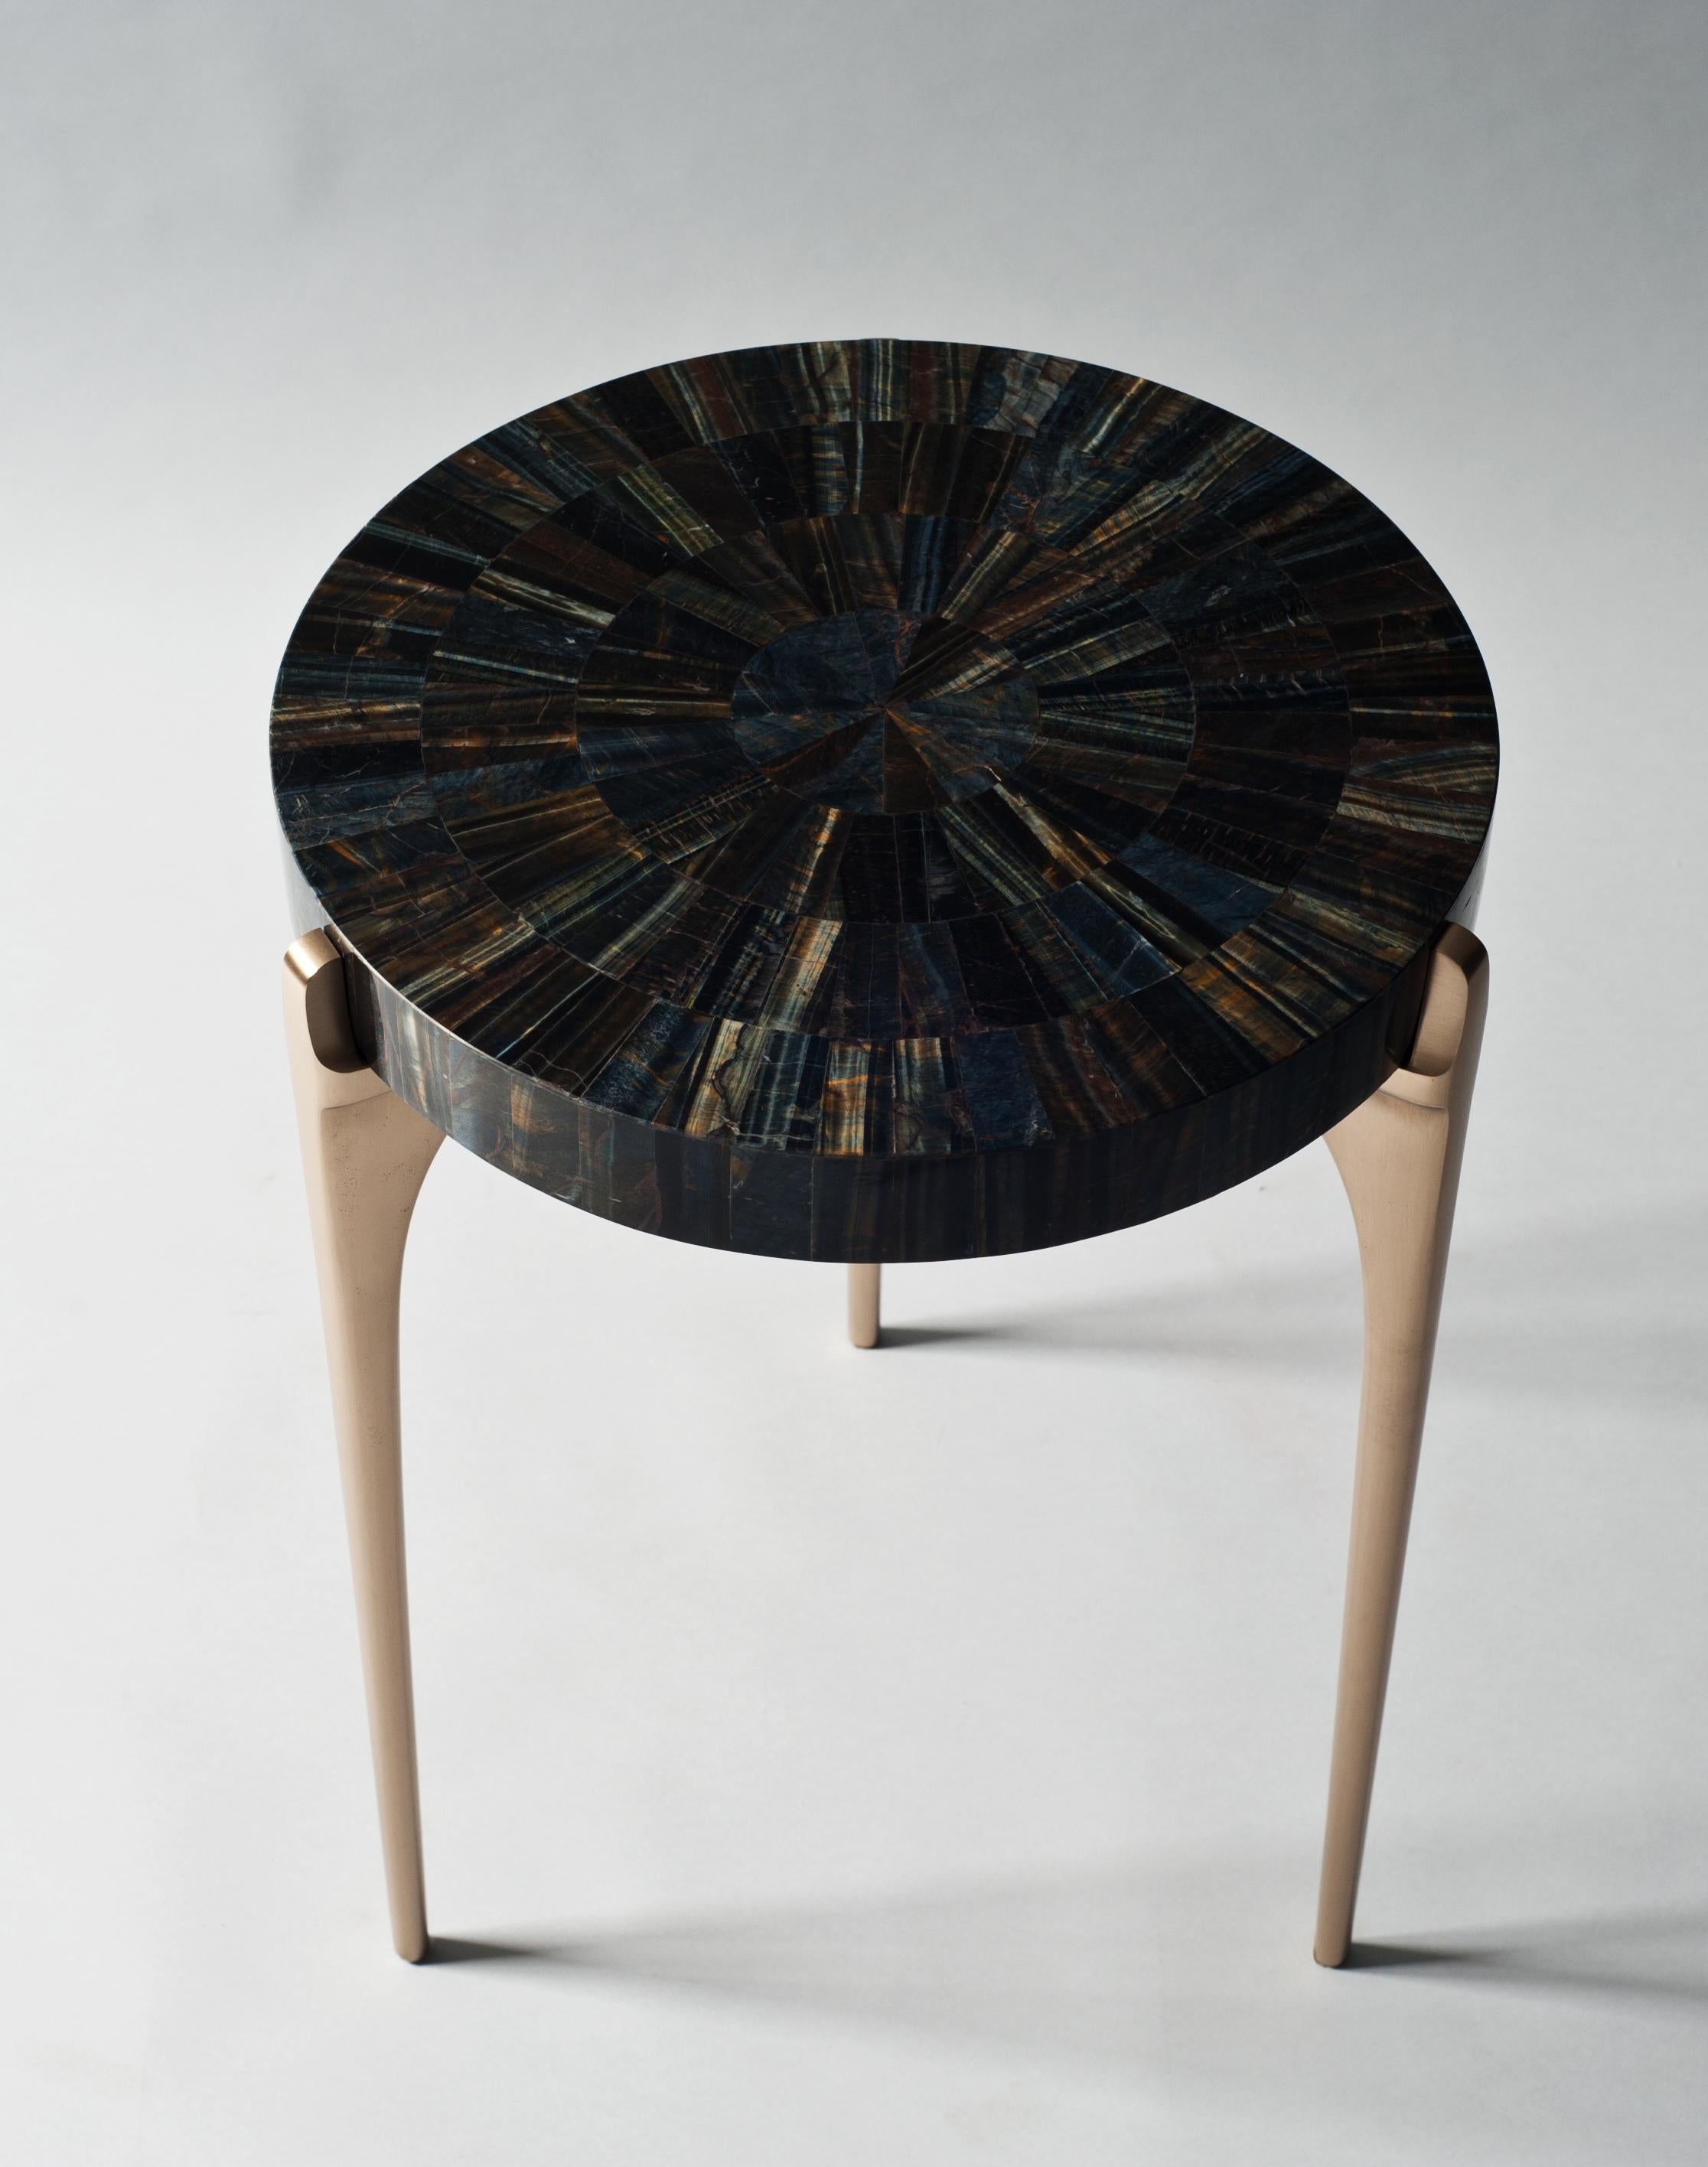 Acantha side table by DeMuro Das 
Dimensions: 41.5 x 55.25 cm
Materials: Tiger's Eye (Blue) - Polished (Tiled) Tabletop
 Solid Bronze - Satin legs

Dimensions and finishes can be customized, please contact us.

DeMuro Das is an international